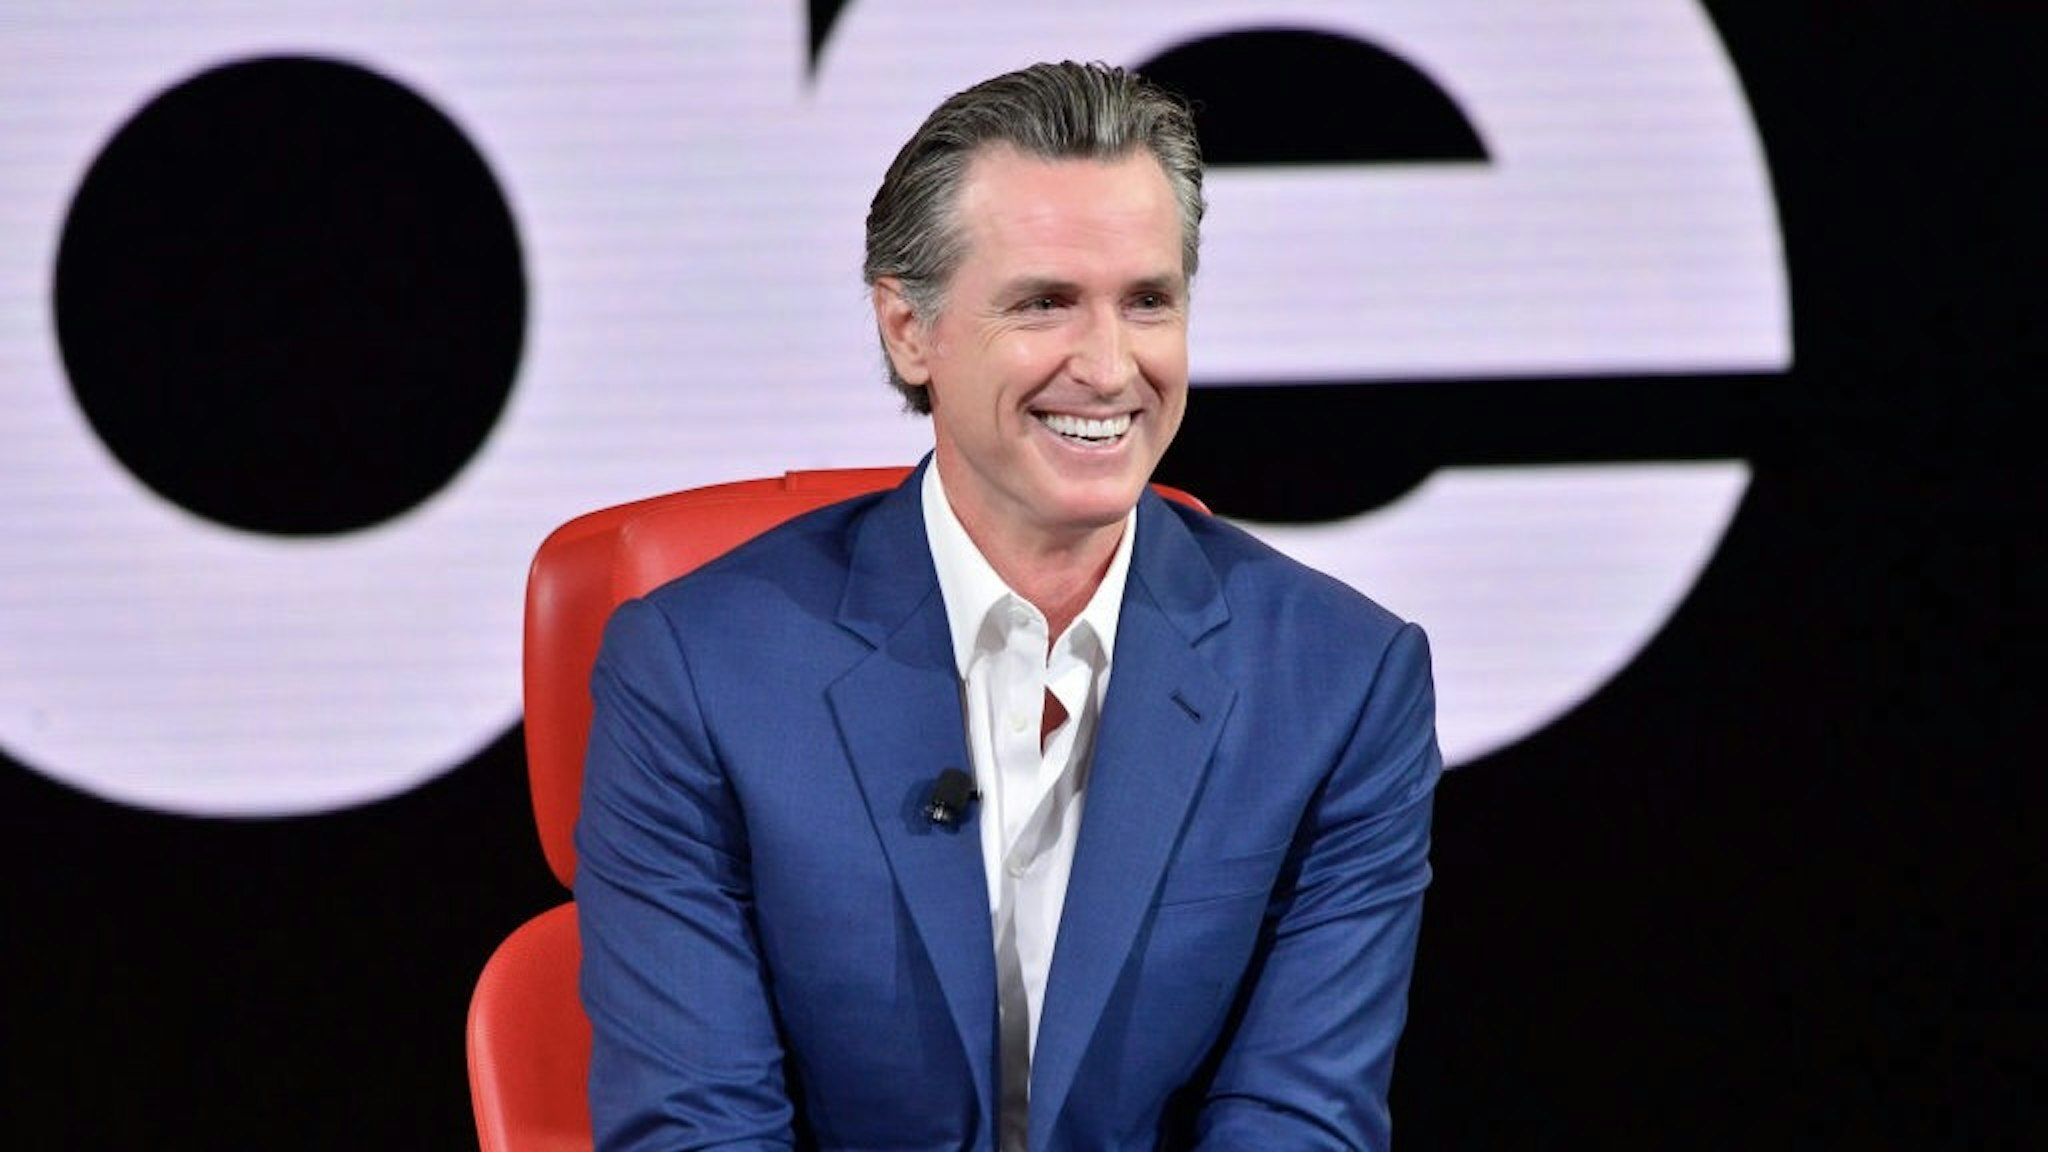 Vox Media's 2022 Code Conference - Day 2 BEVERLY HILLS, CALIFORNIA - SEPTEMBER 07: Governor of California Gavin Newsom speaks onstage during Vox Media's 2022 Code Conference - Day 2 on September 07, 2022 in Beverly Hills, California. (Photo by Jerod Harris/Getty Images for Vox Media) Jerod Harris / Stringer